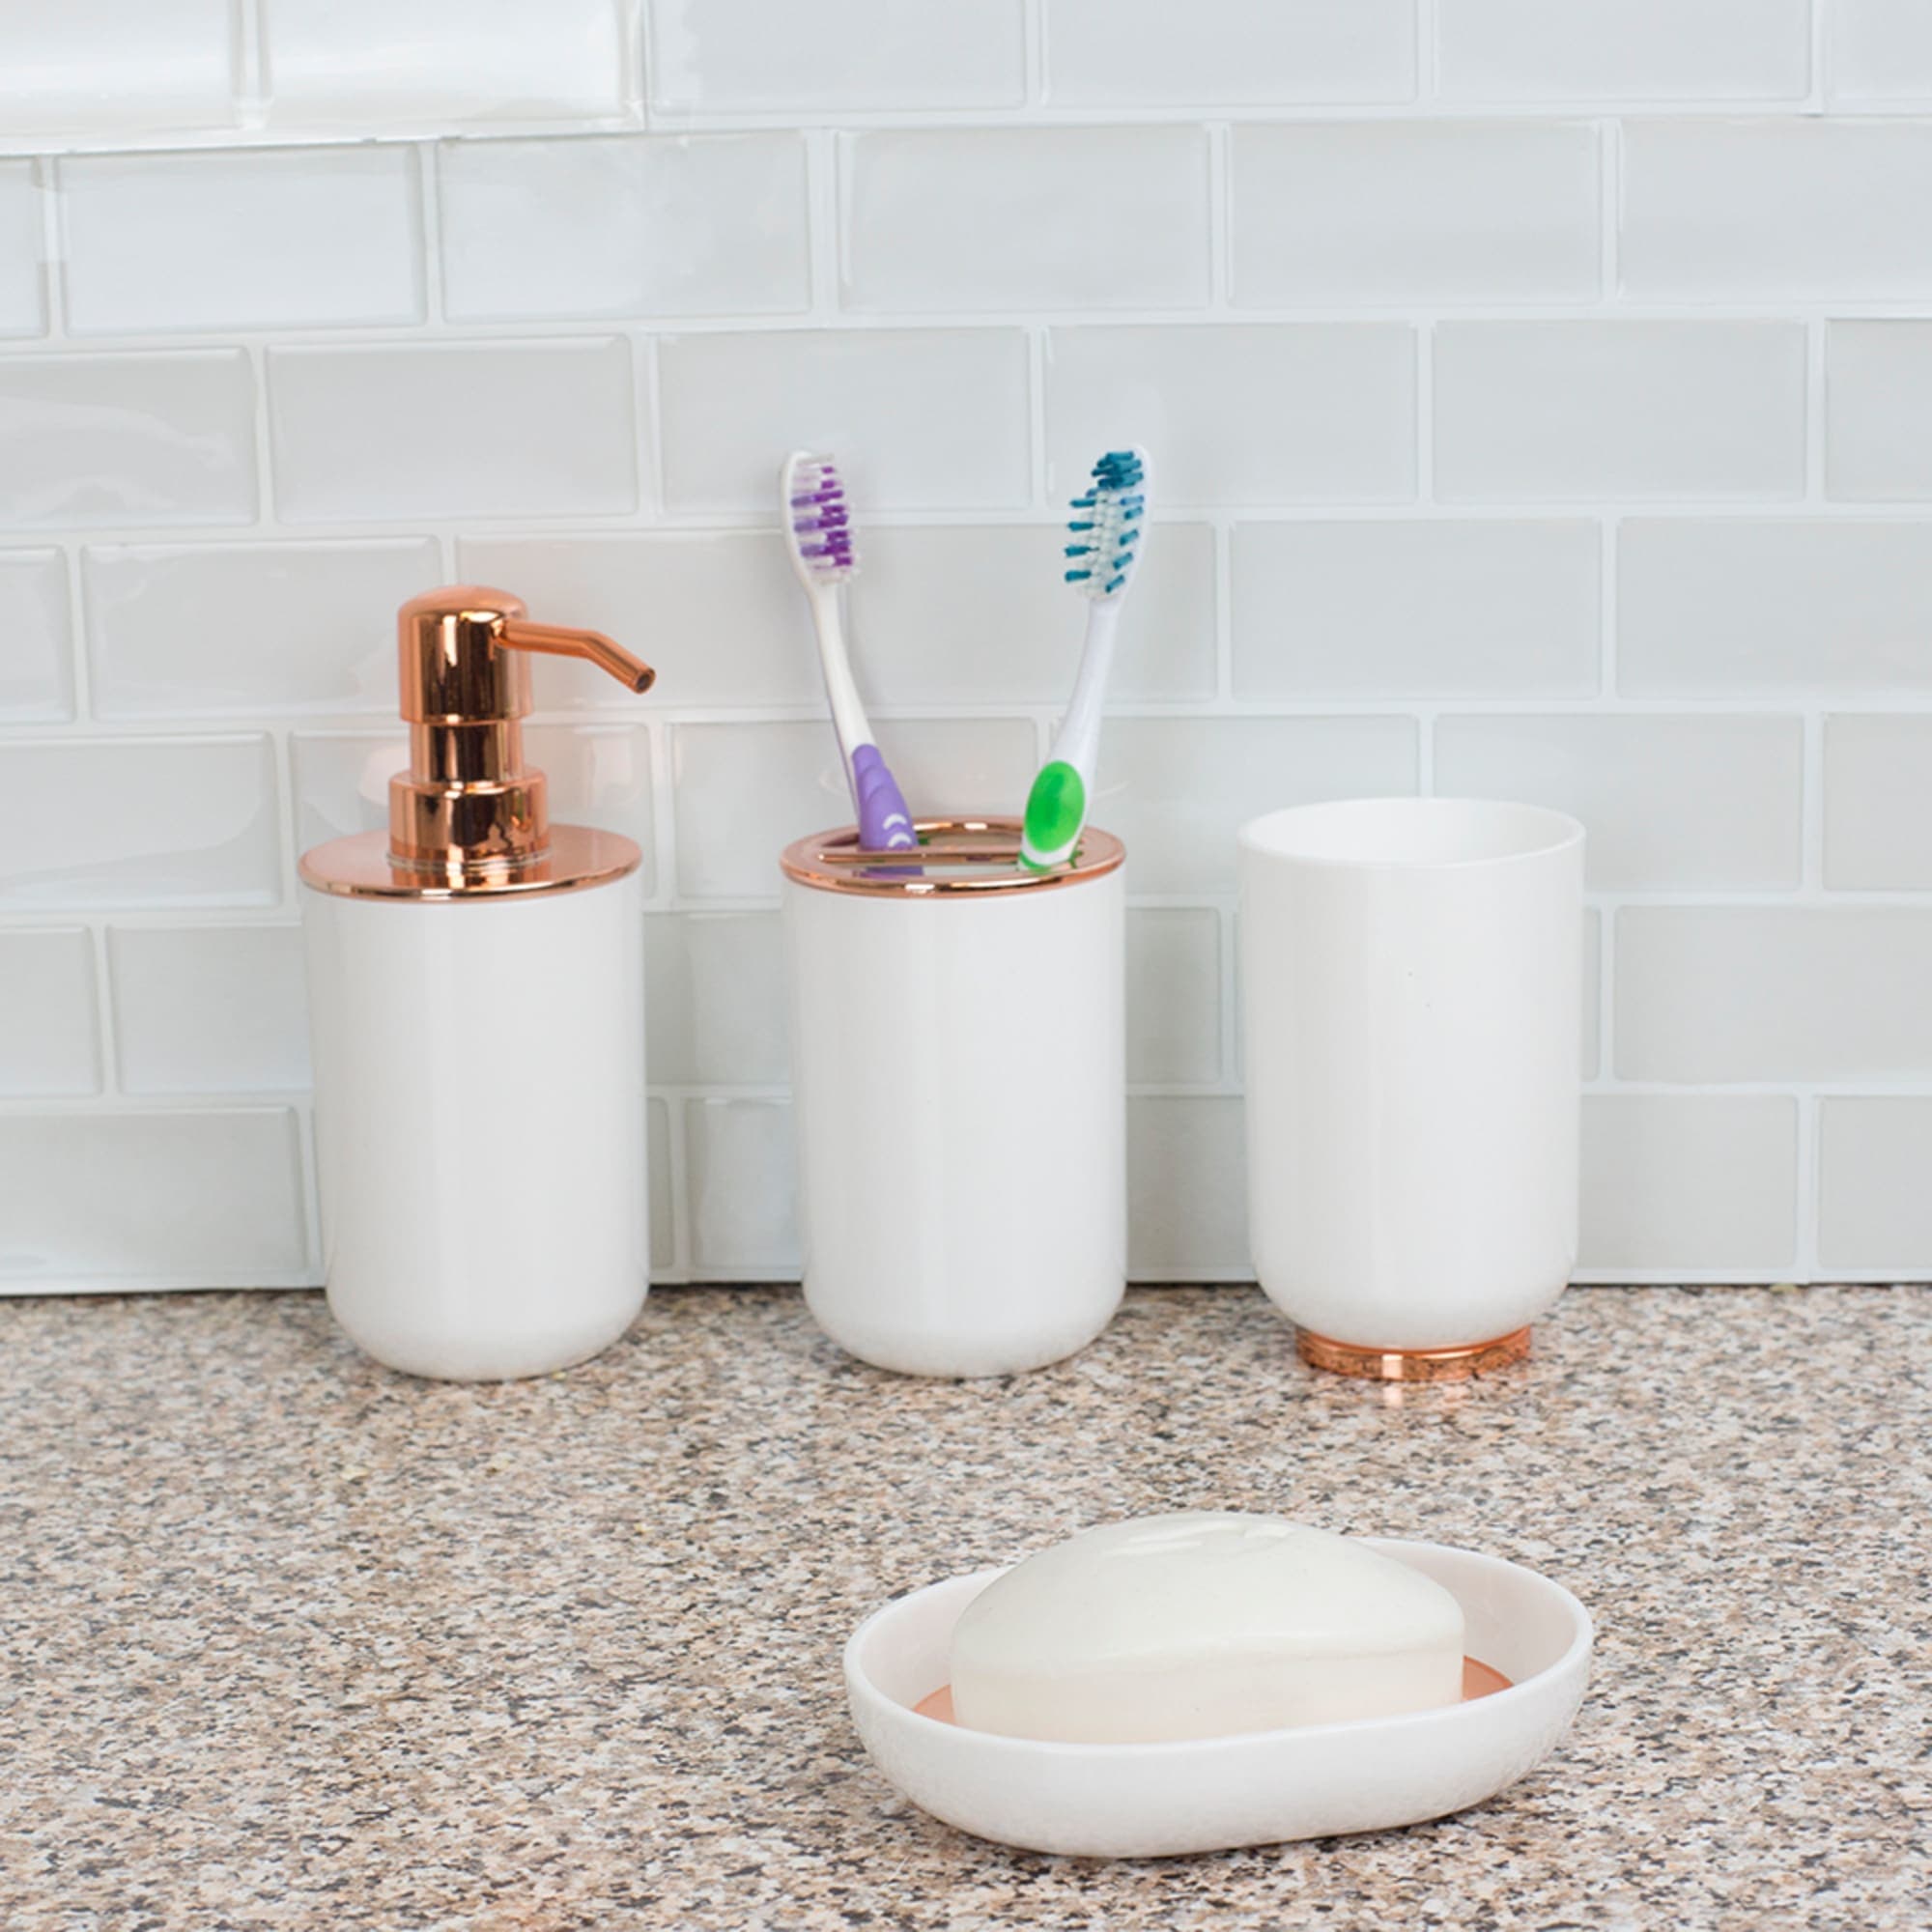 Home Basics 4 Piece Ceramic Bath Accessory Set with Rose Gold Accents, White $15.00 EACH, CASE PACK OF 12